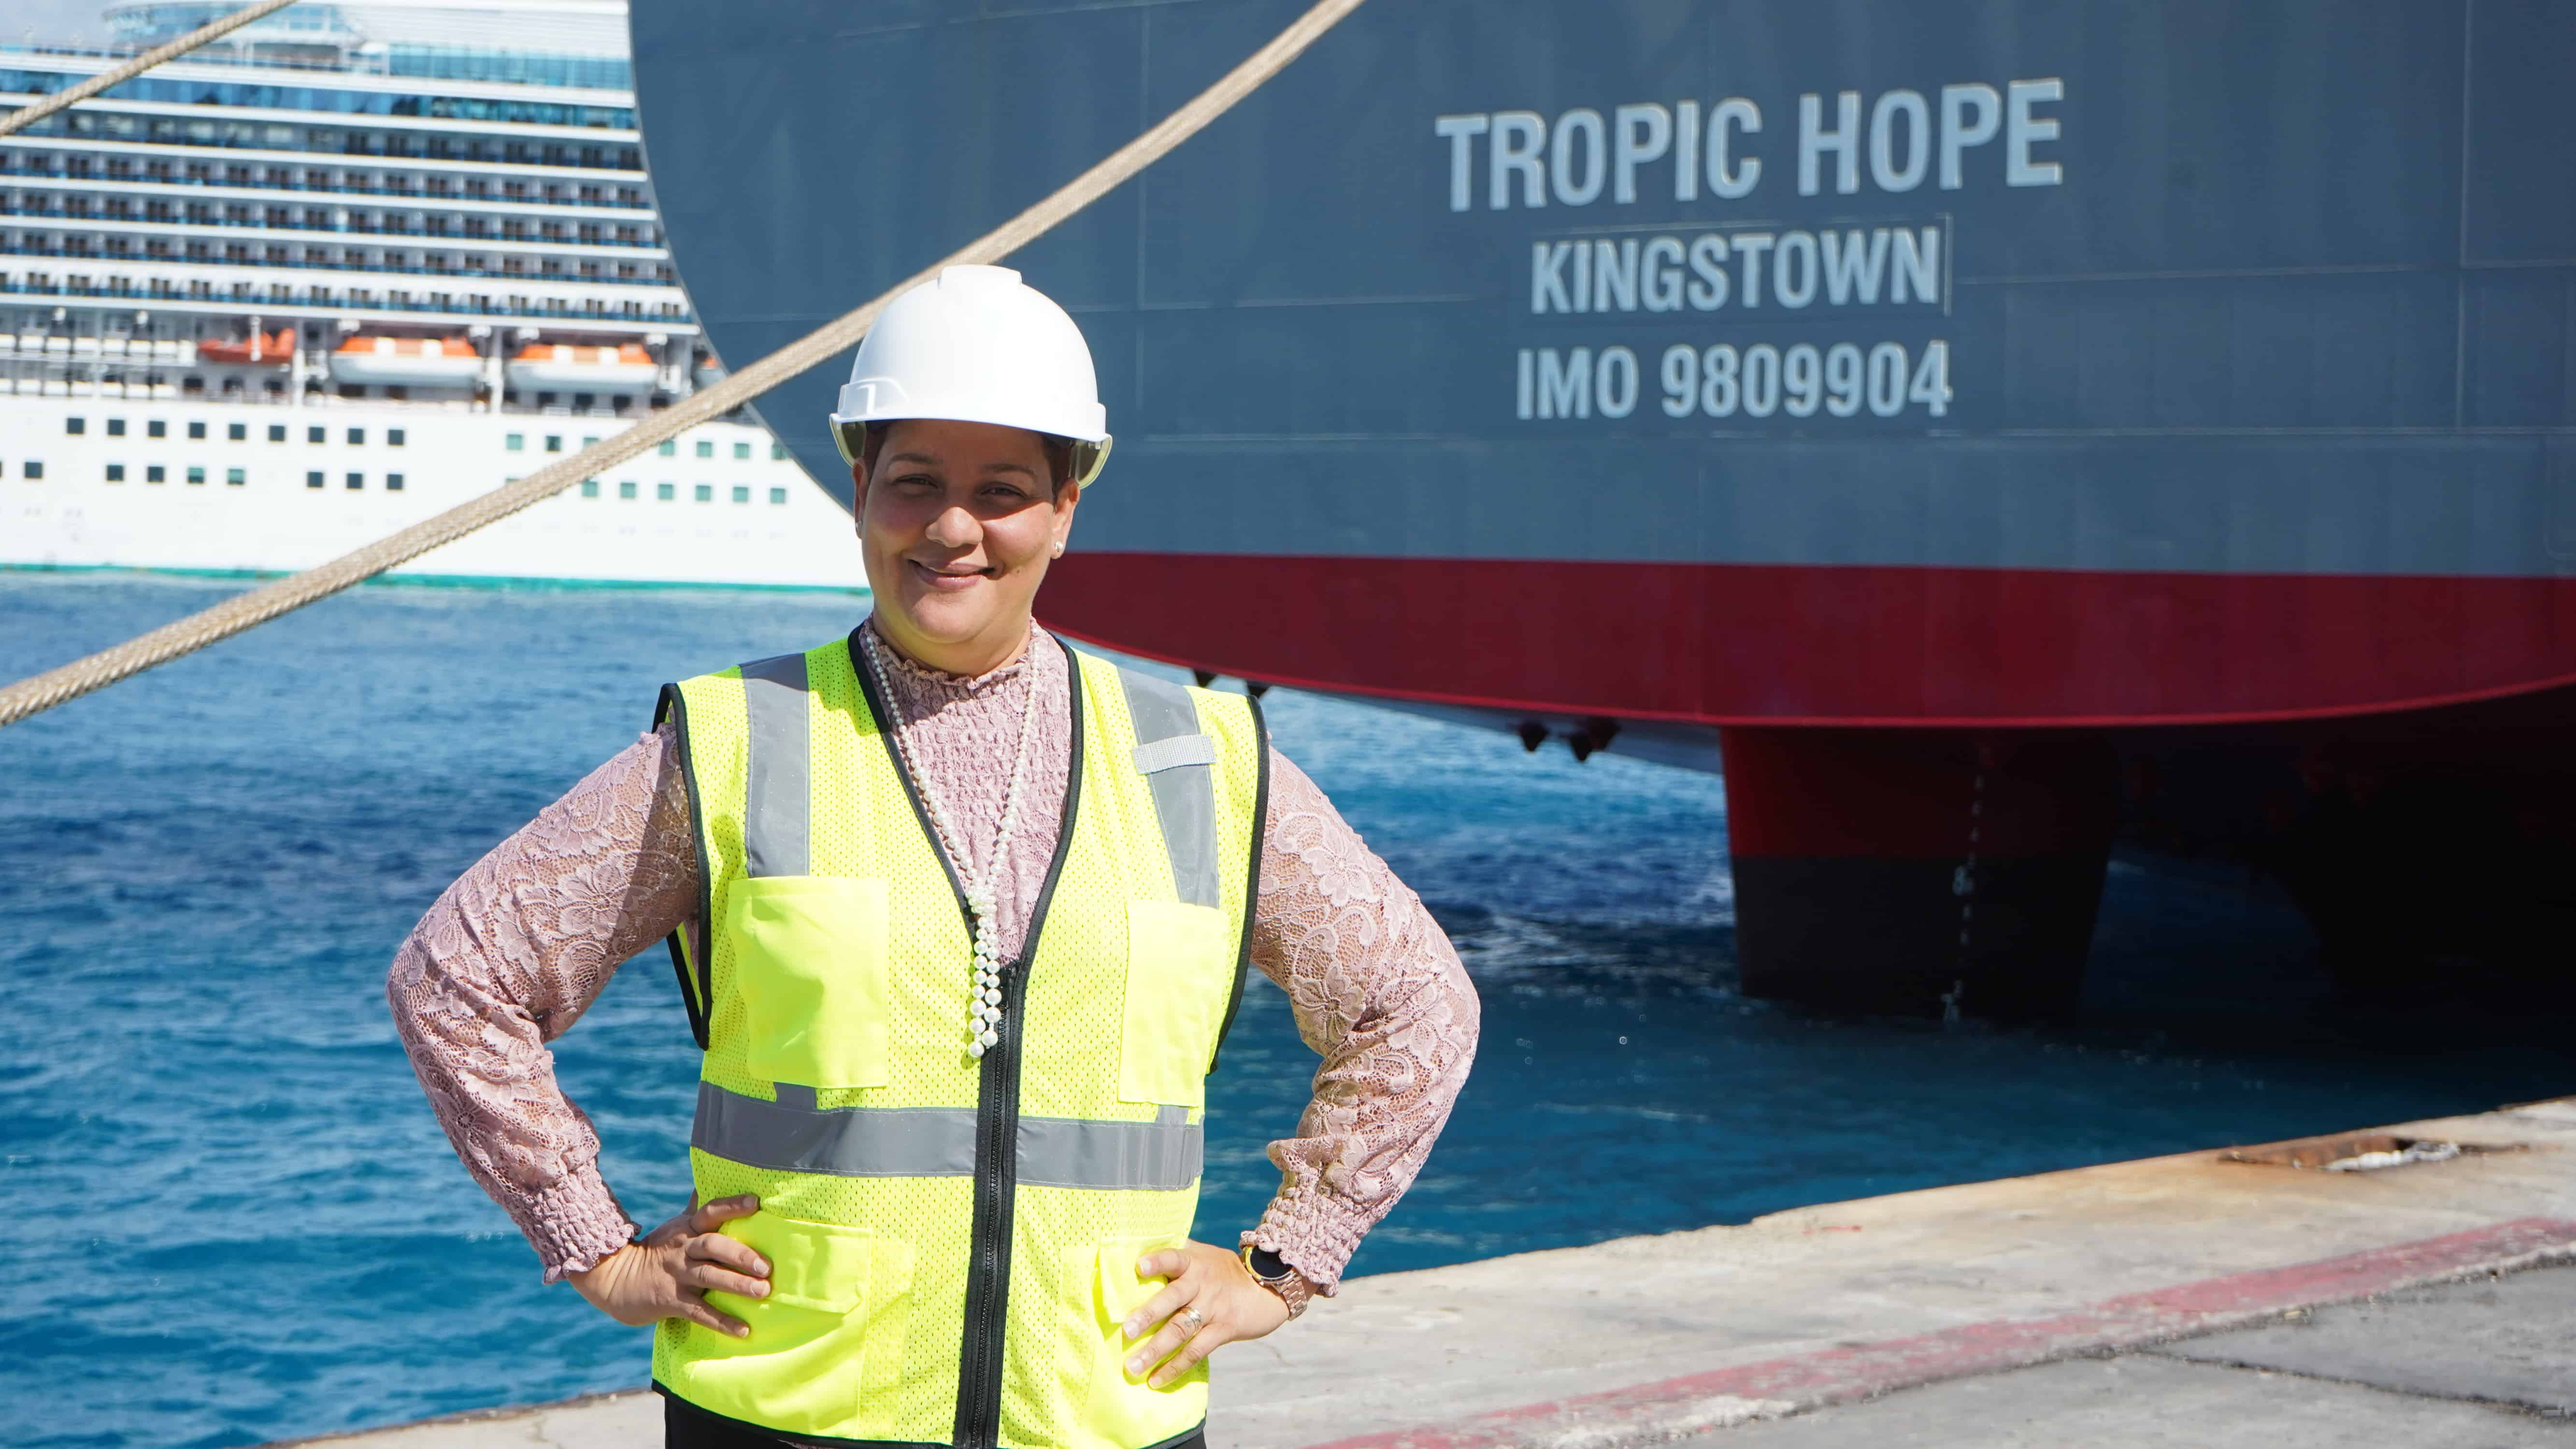 Keyla stands in front of the stern of the Tropic Hope, wearing a hard hat and reflective vest.